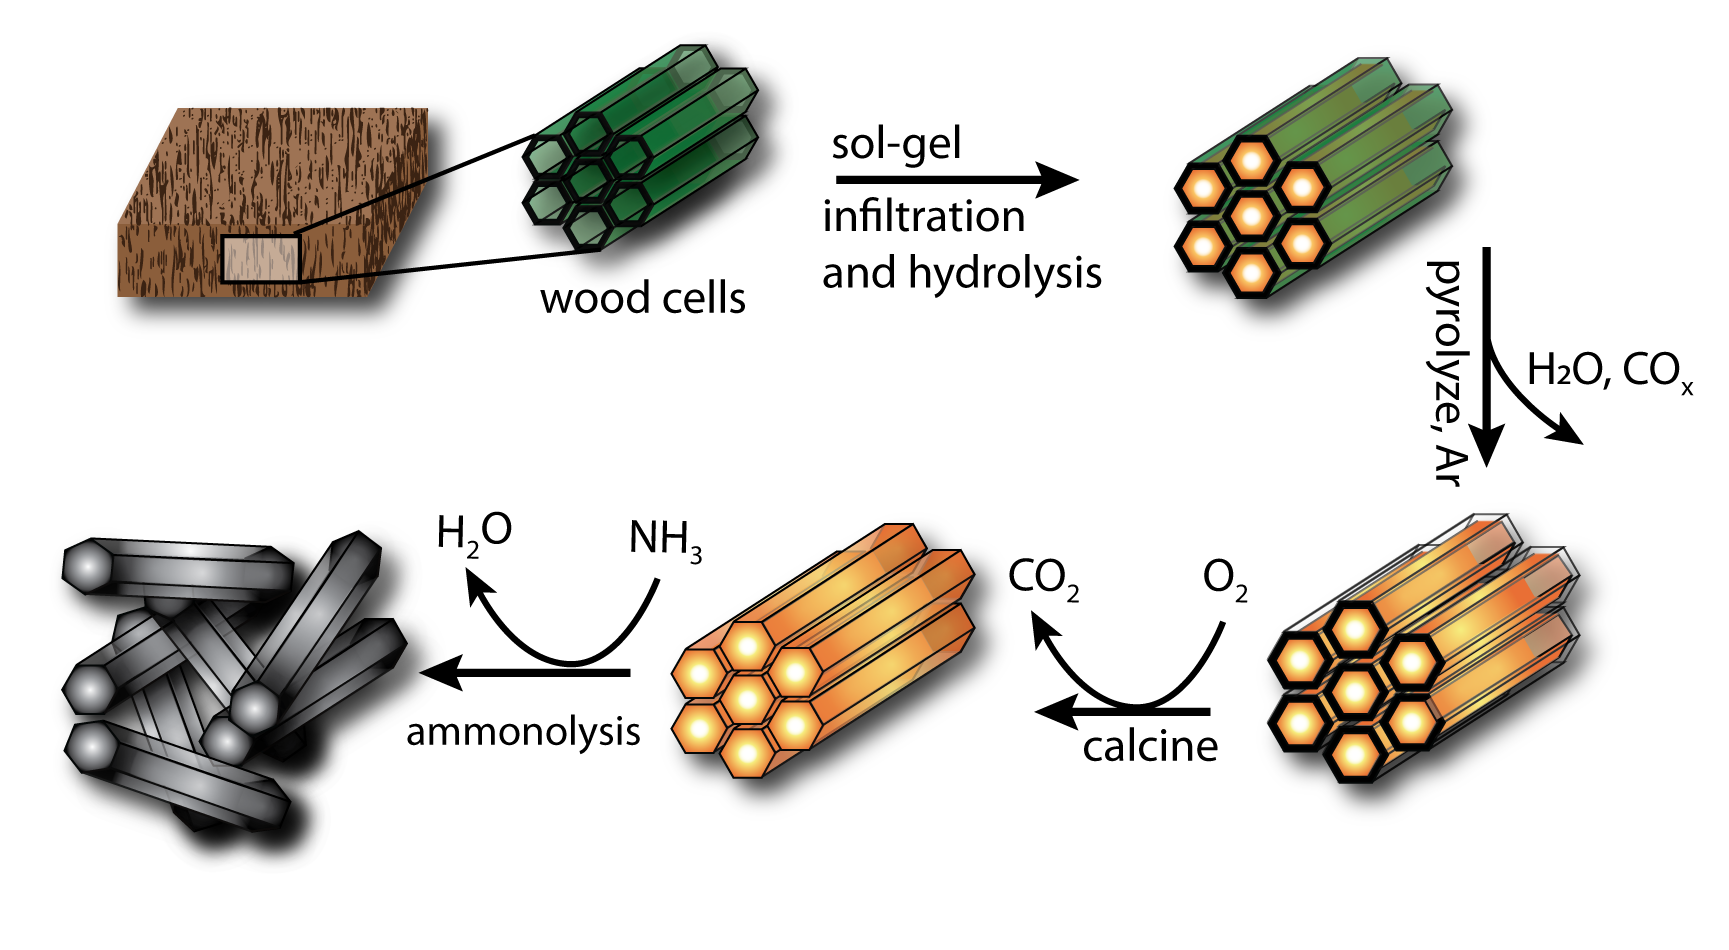 Inverse biometric templating of wood cells with inorganic oxides.